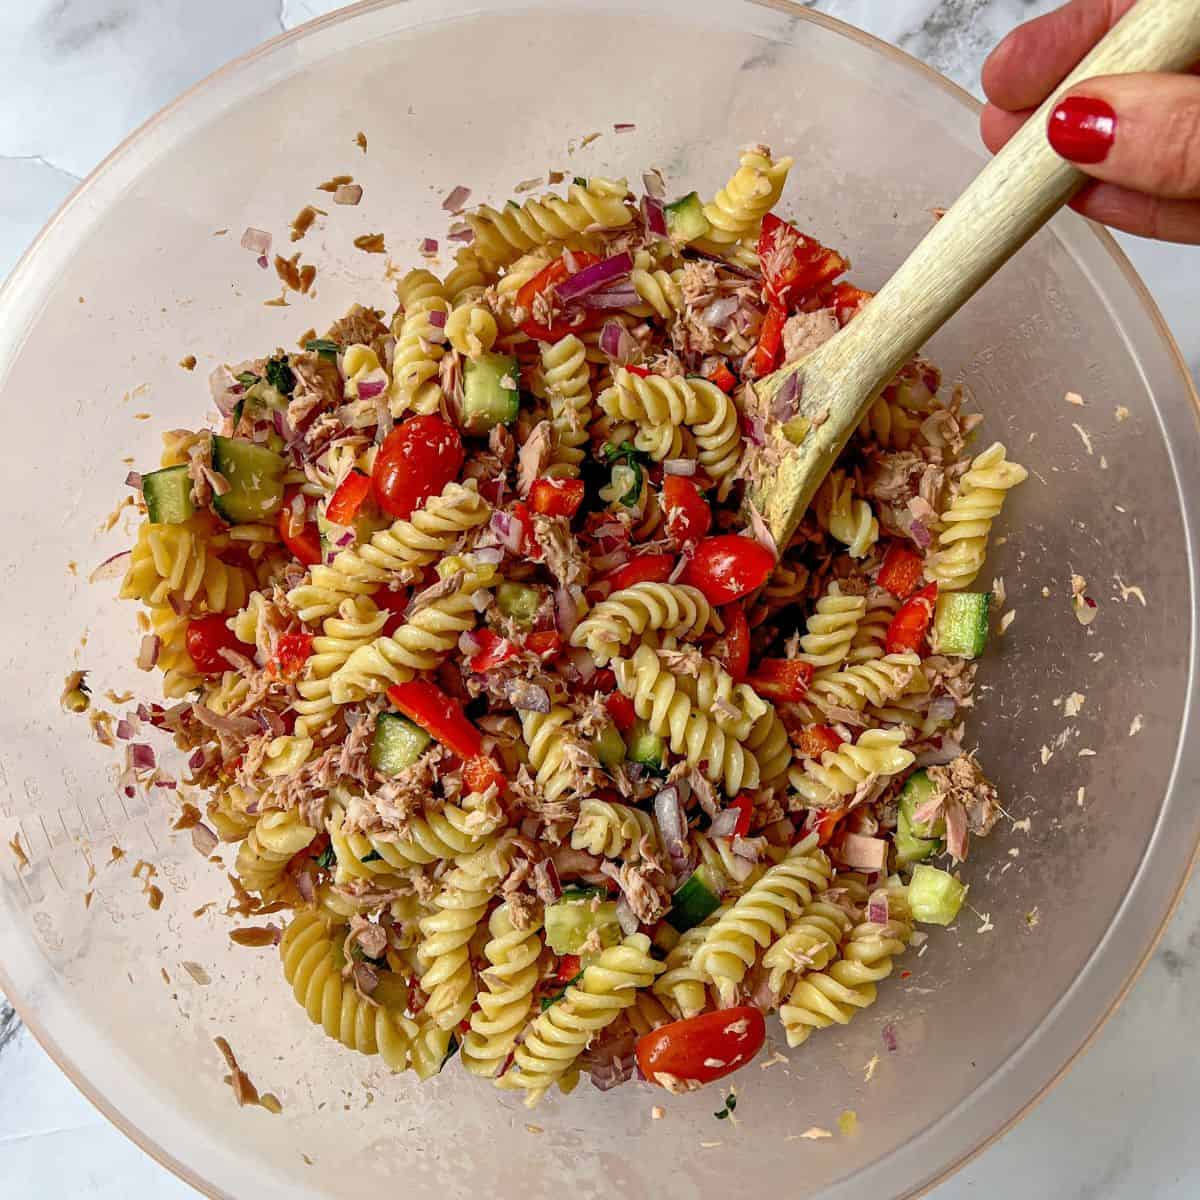 Tuna pasta salad in a large bowl being stirred with a wooden spoon.